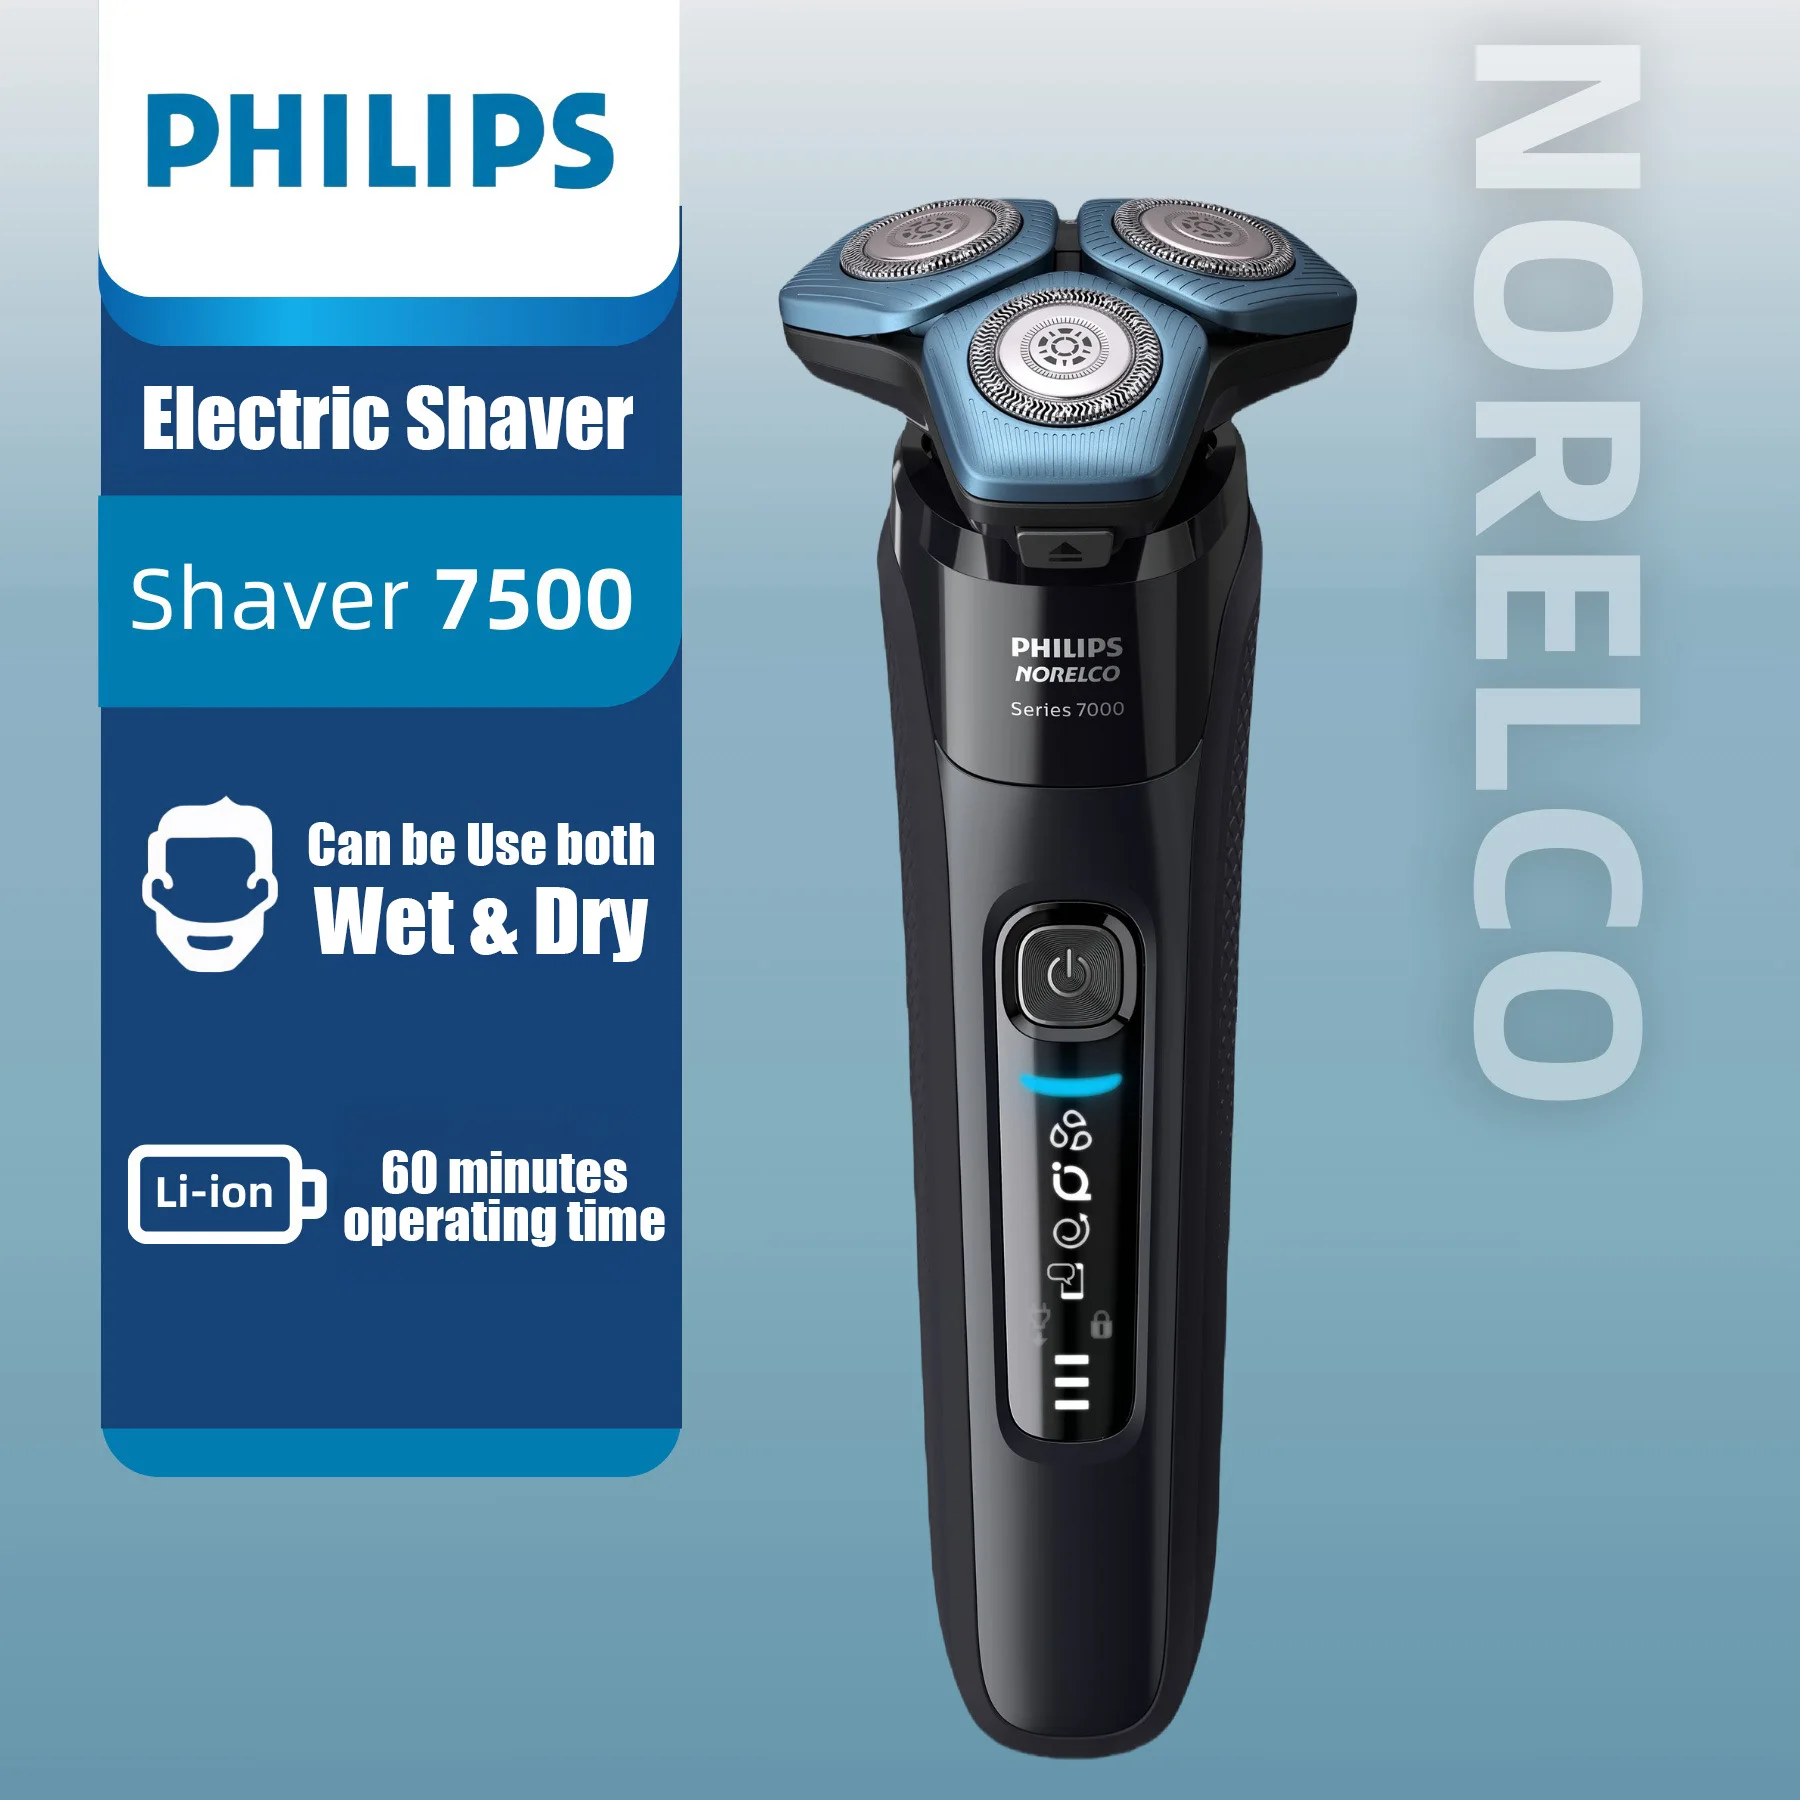 

Philips Norelco Shaver 7500 S7783 Wet & dry electric rotation shaver, Series 7000, Black